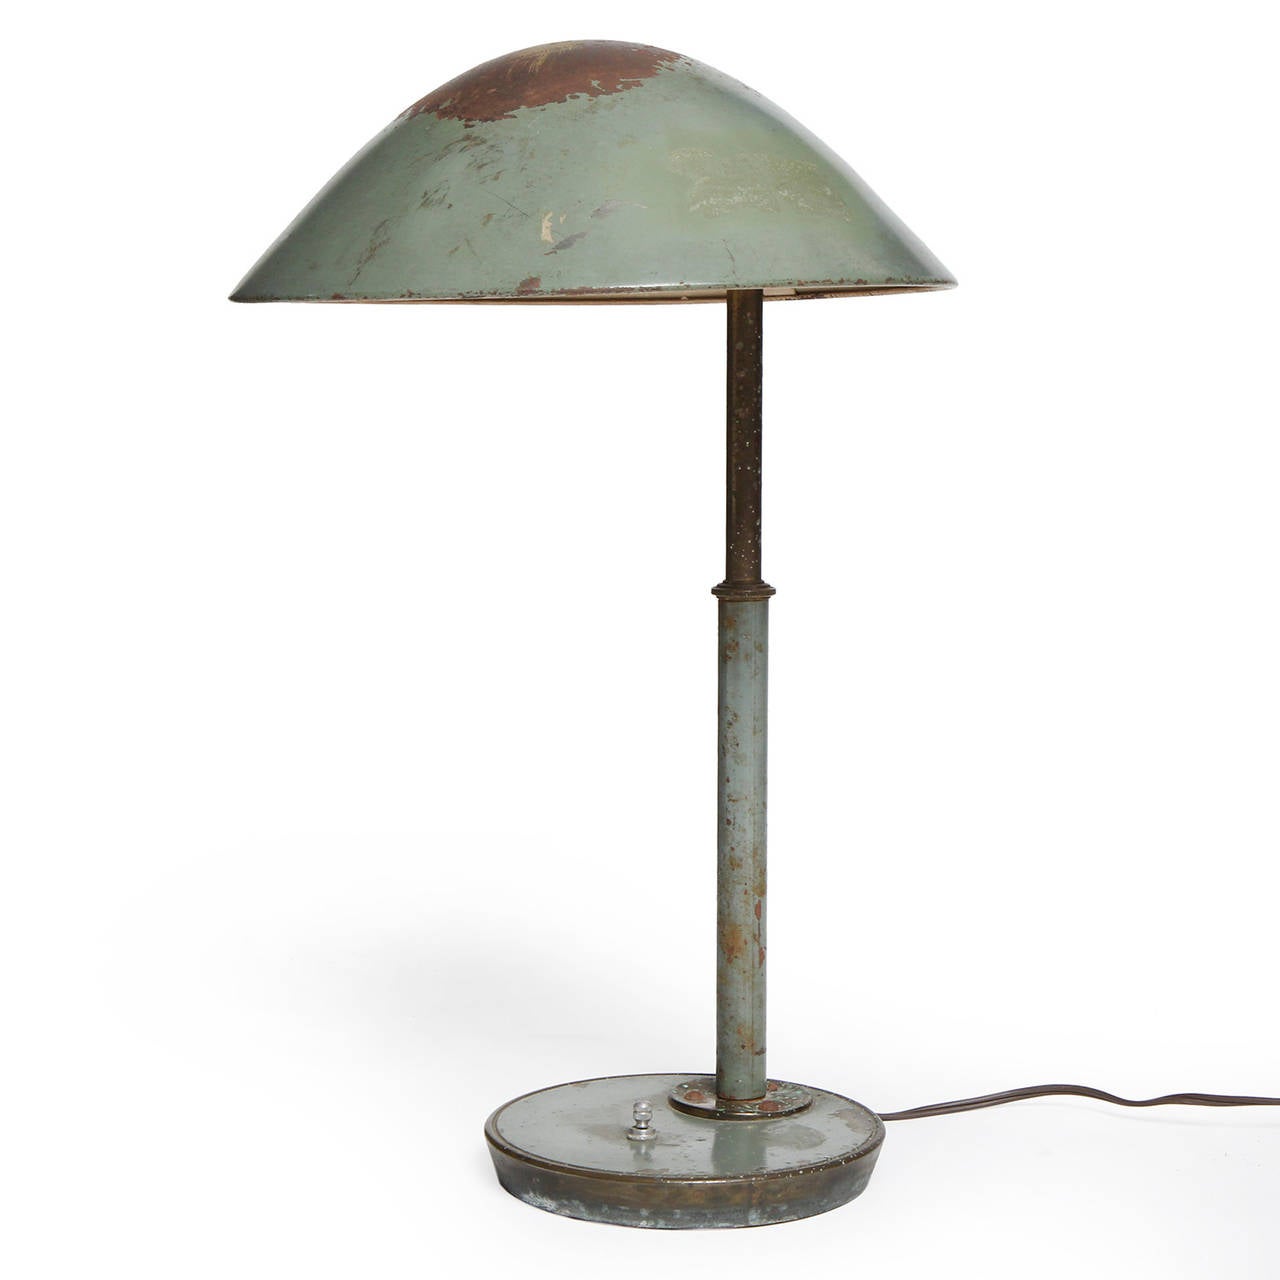 A spare, refined and finely crafted painted Bauhaus era brass table lamp having a domed shade floating above a weighted disc base .